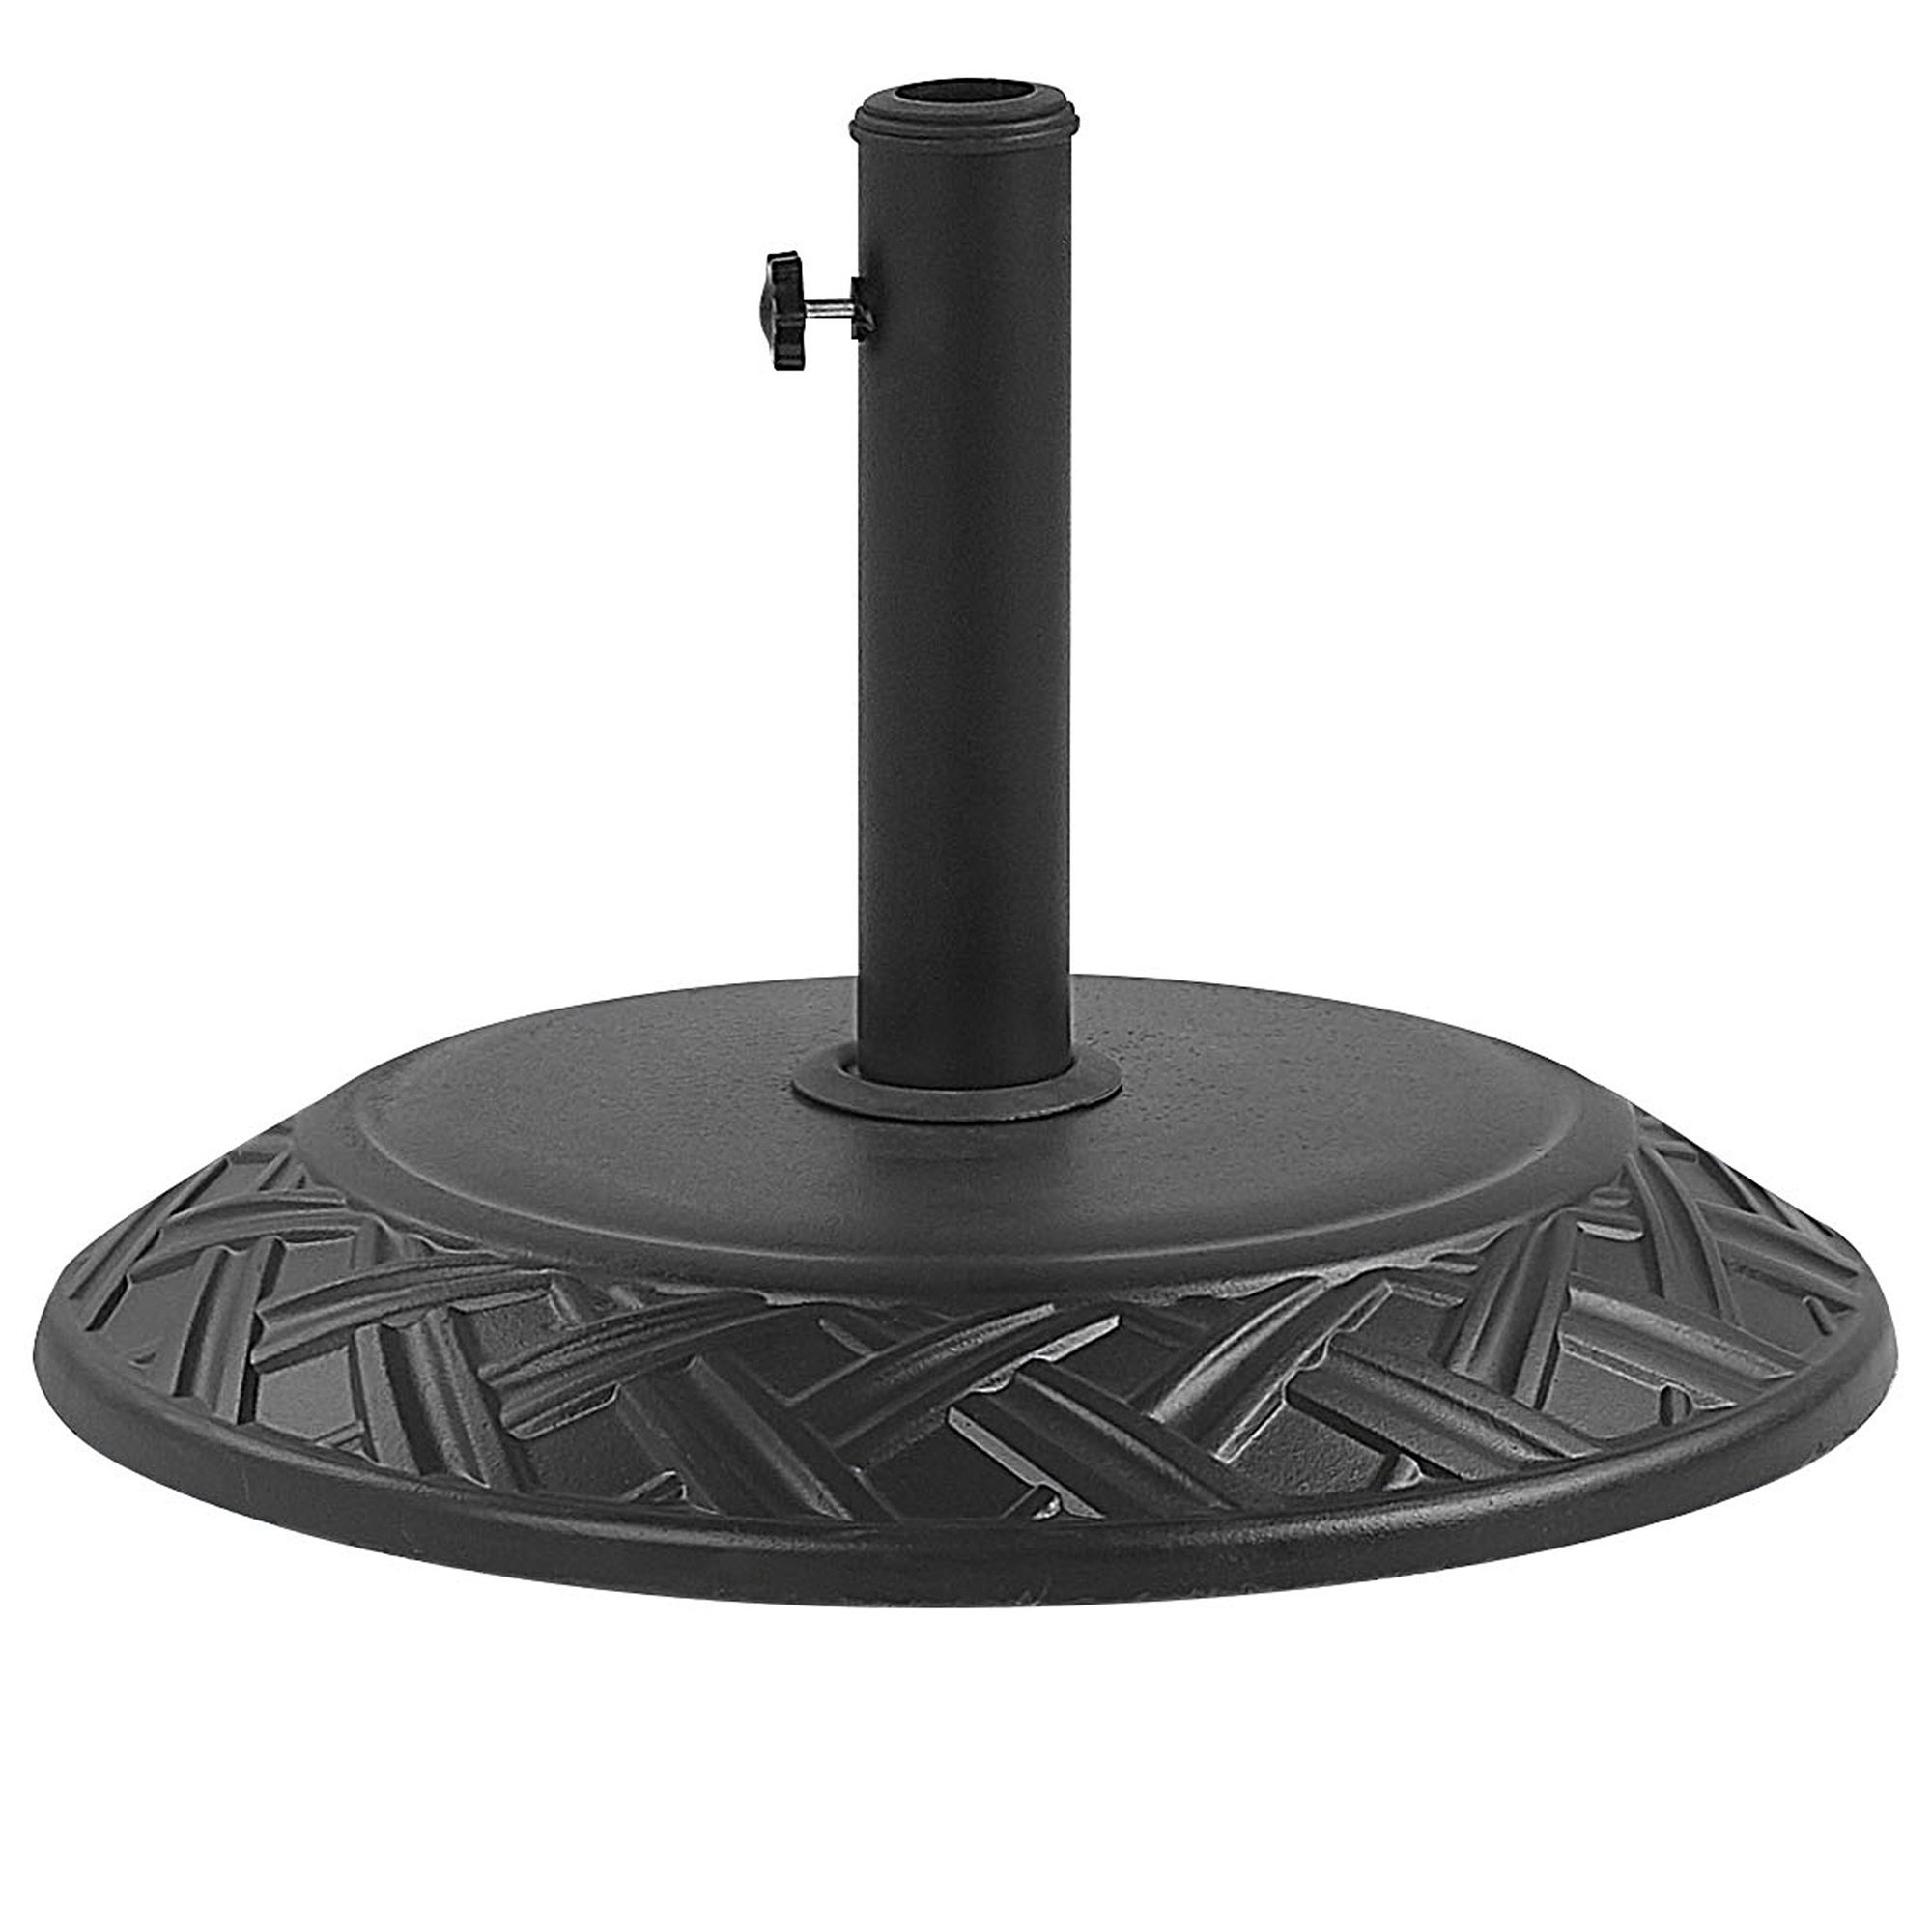 Beliani Parasol Base Black Concrete 23 kg Round Outdoor Umbrella Stand All Weather 3 Pole Adapters